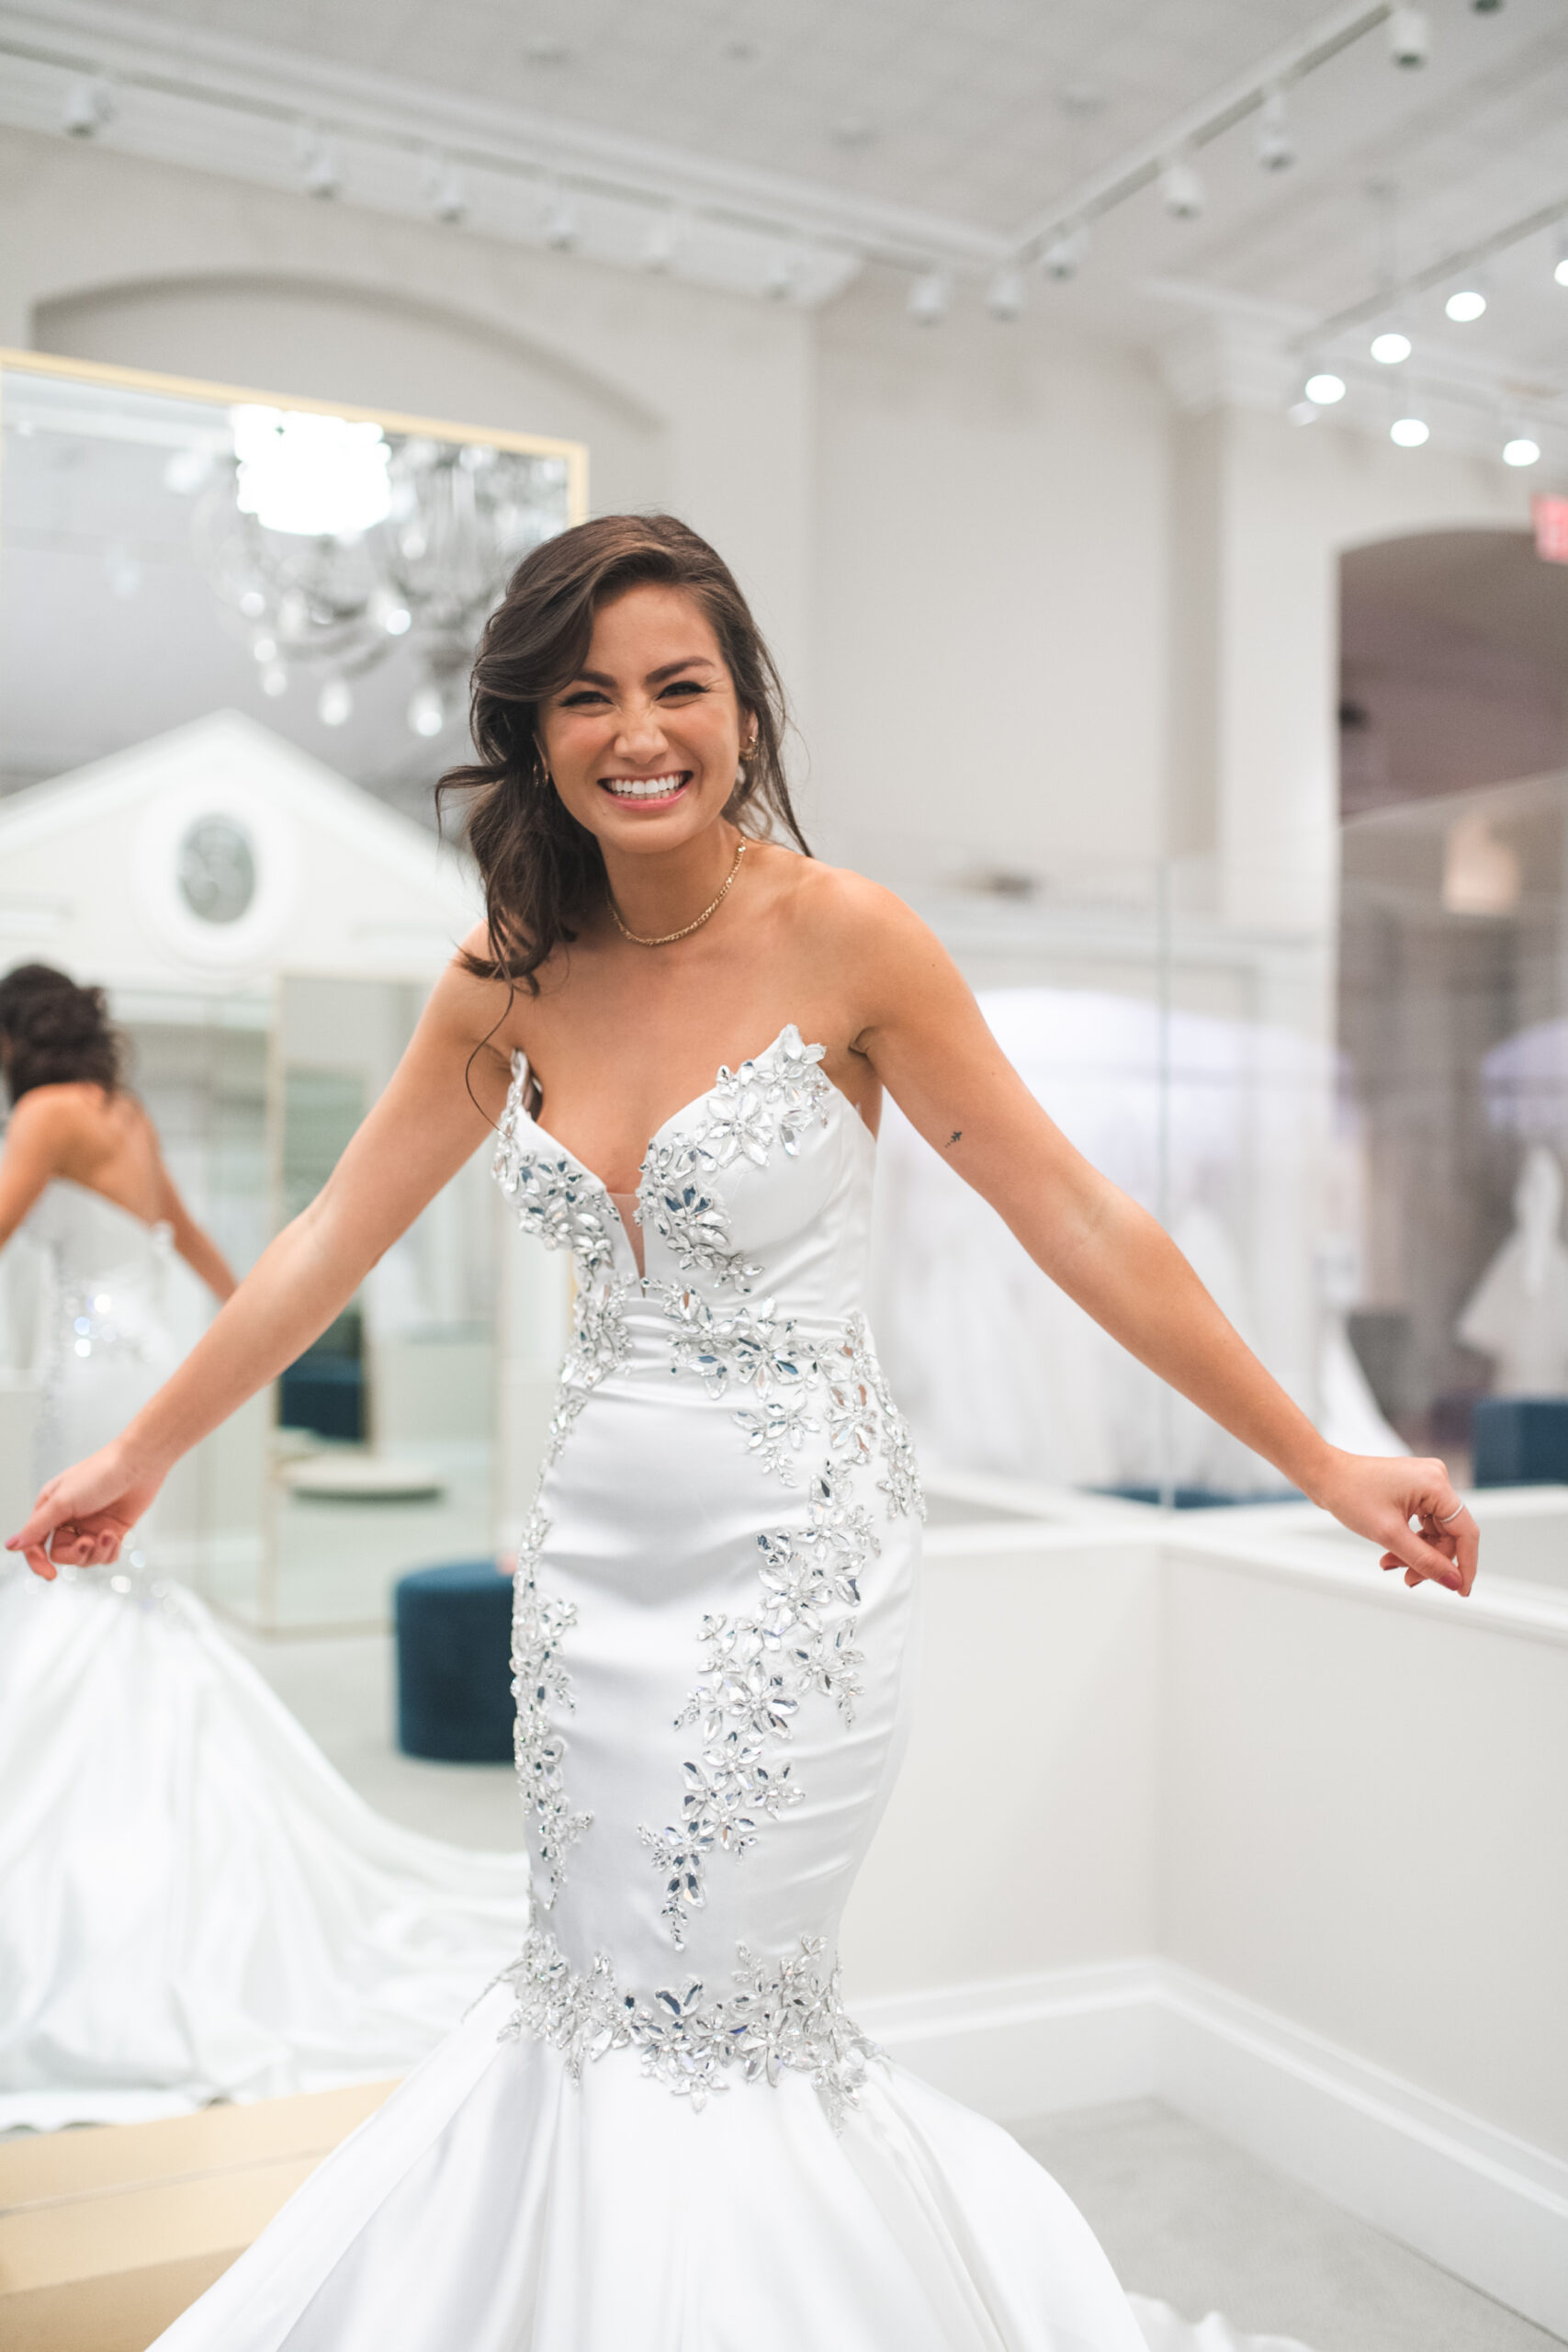 What it’s like “Saying Yes to the Dress” at Kleinfeld Bridal Pre